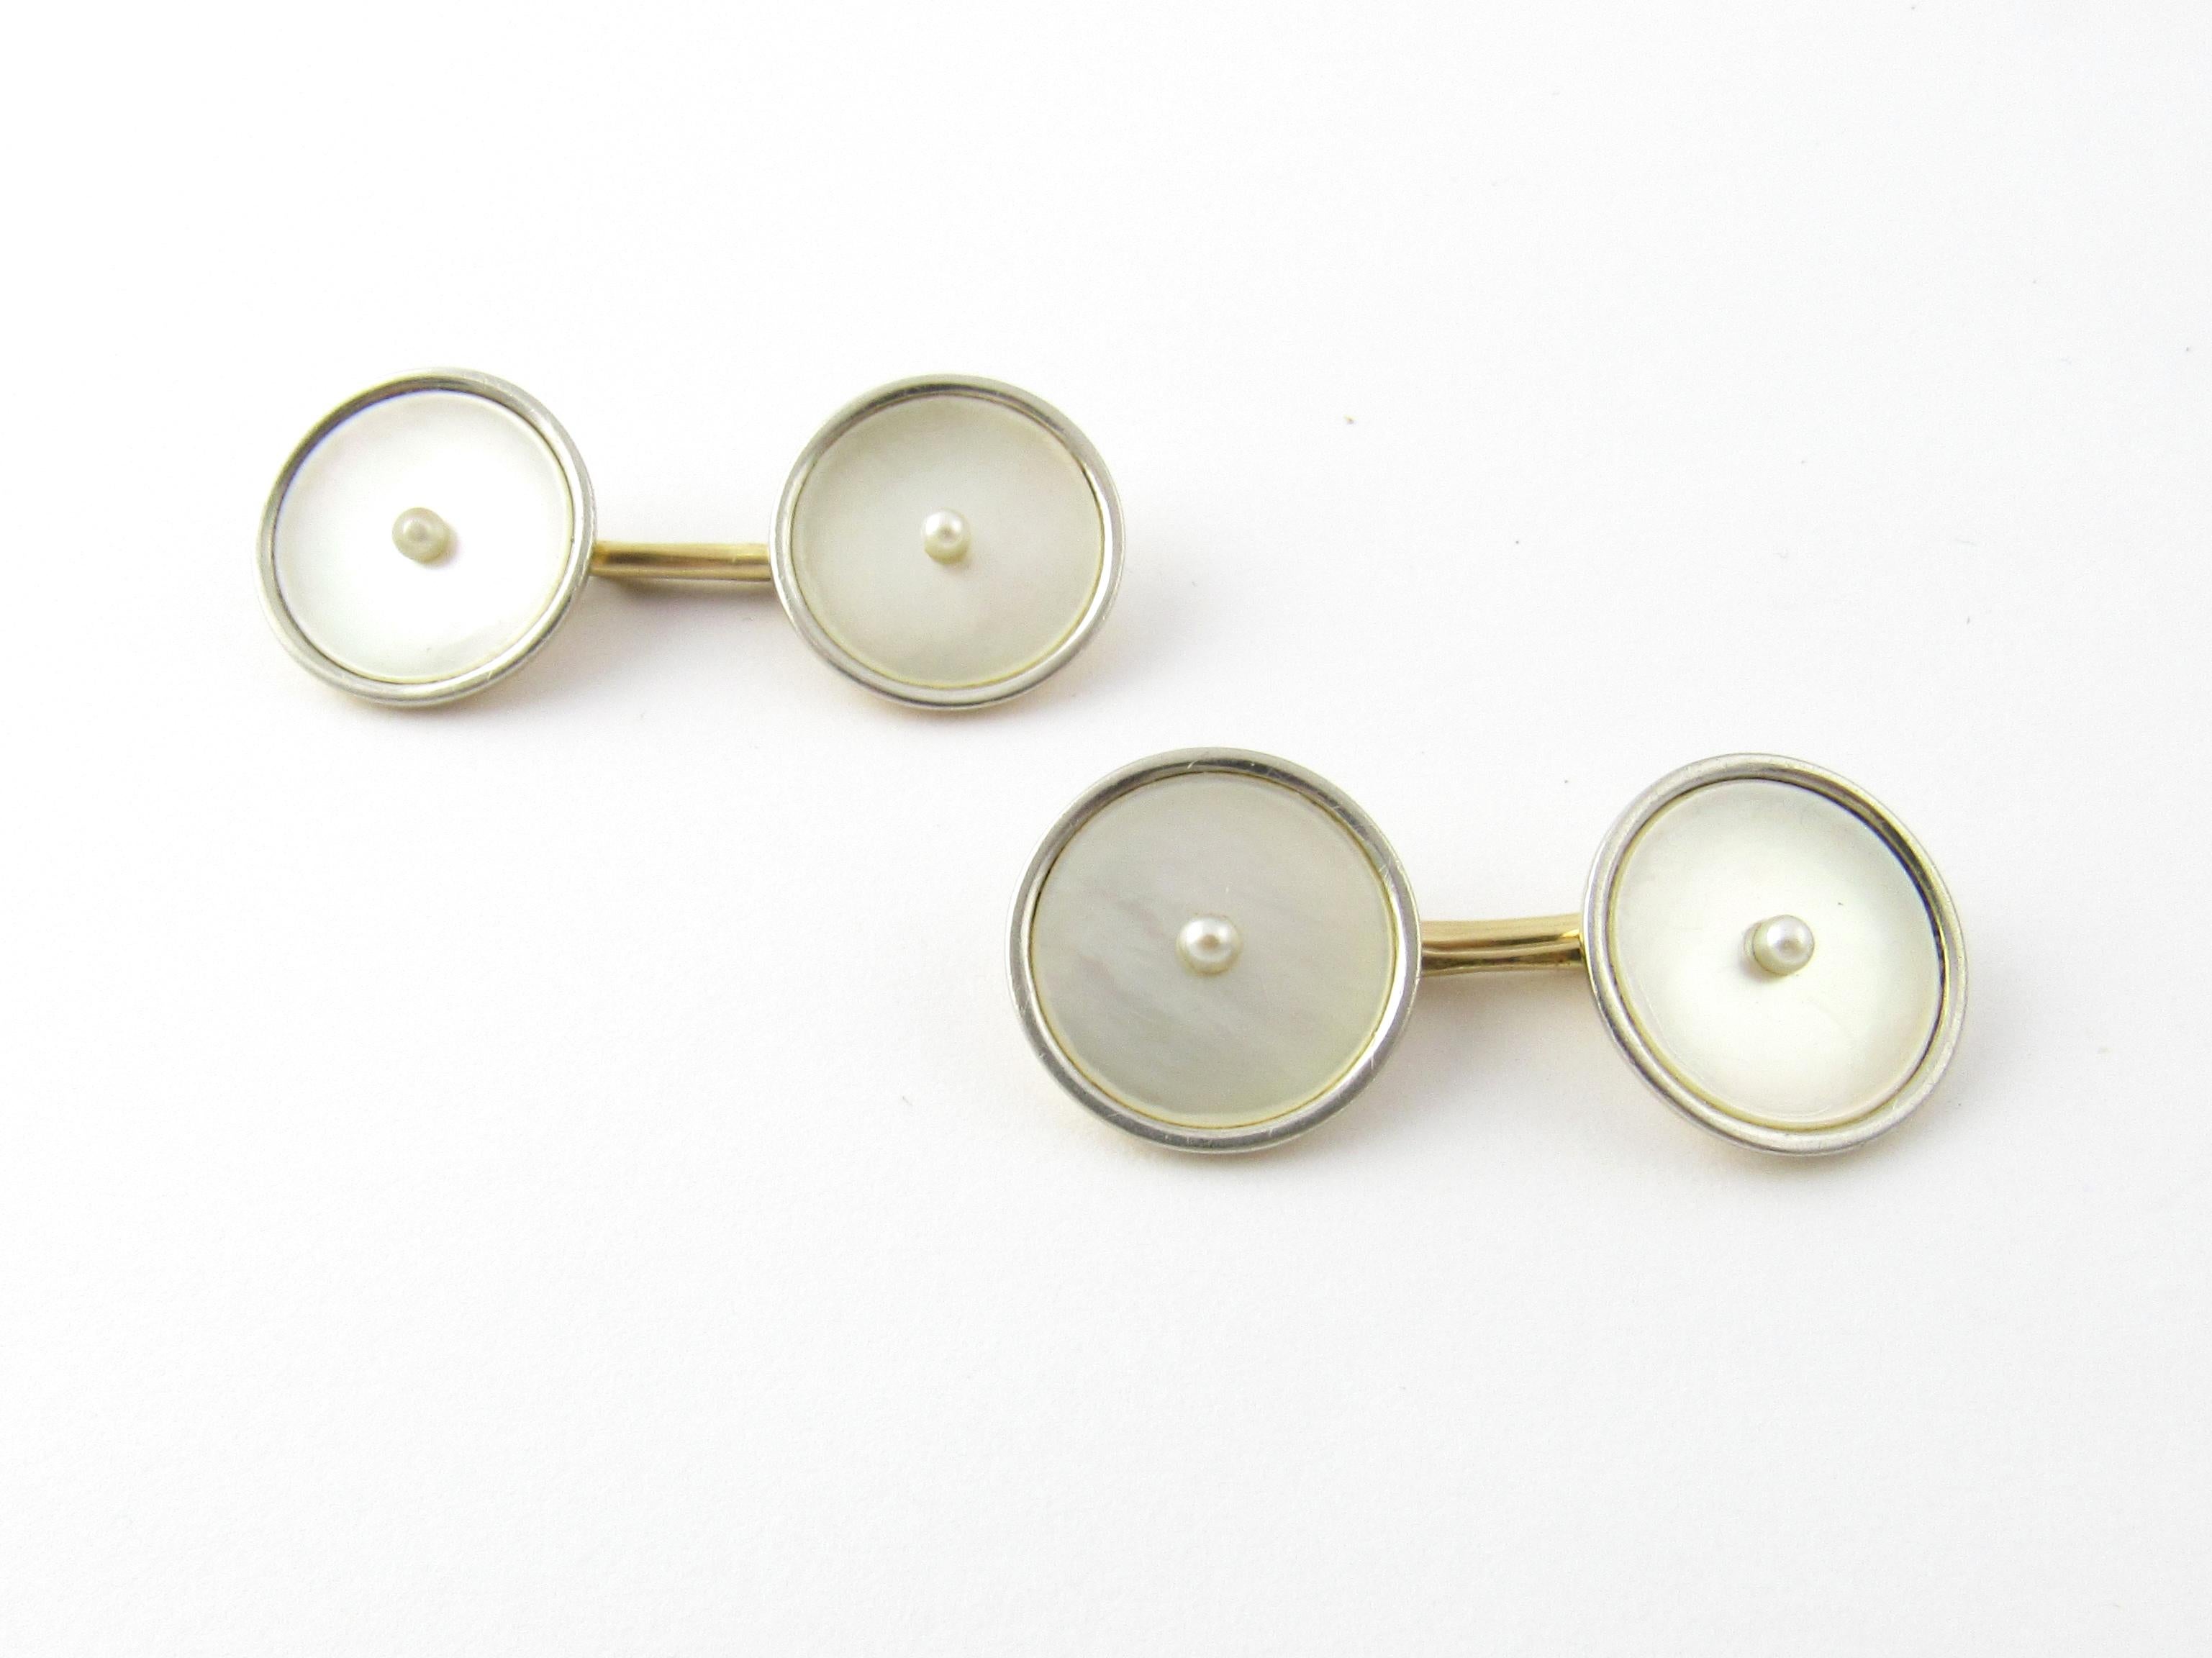 14 Karat Yellow Gold Mother of Pearl Cufflinks-

These elegant cufflinks are each accented with mother of pearl and one seed pearl.  Beautifully detailed in 14K yellow gold.

Size:  14 mm

Weight:  4.6 dwt. /  7.3 gr. 

Stamped: 14K 

Very good